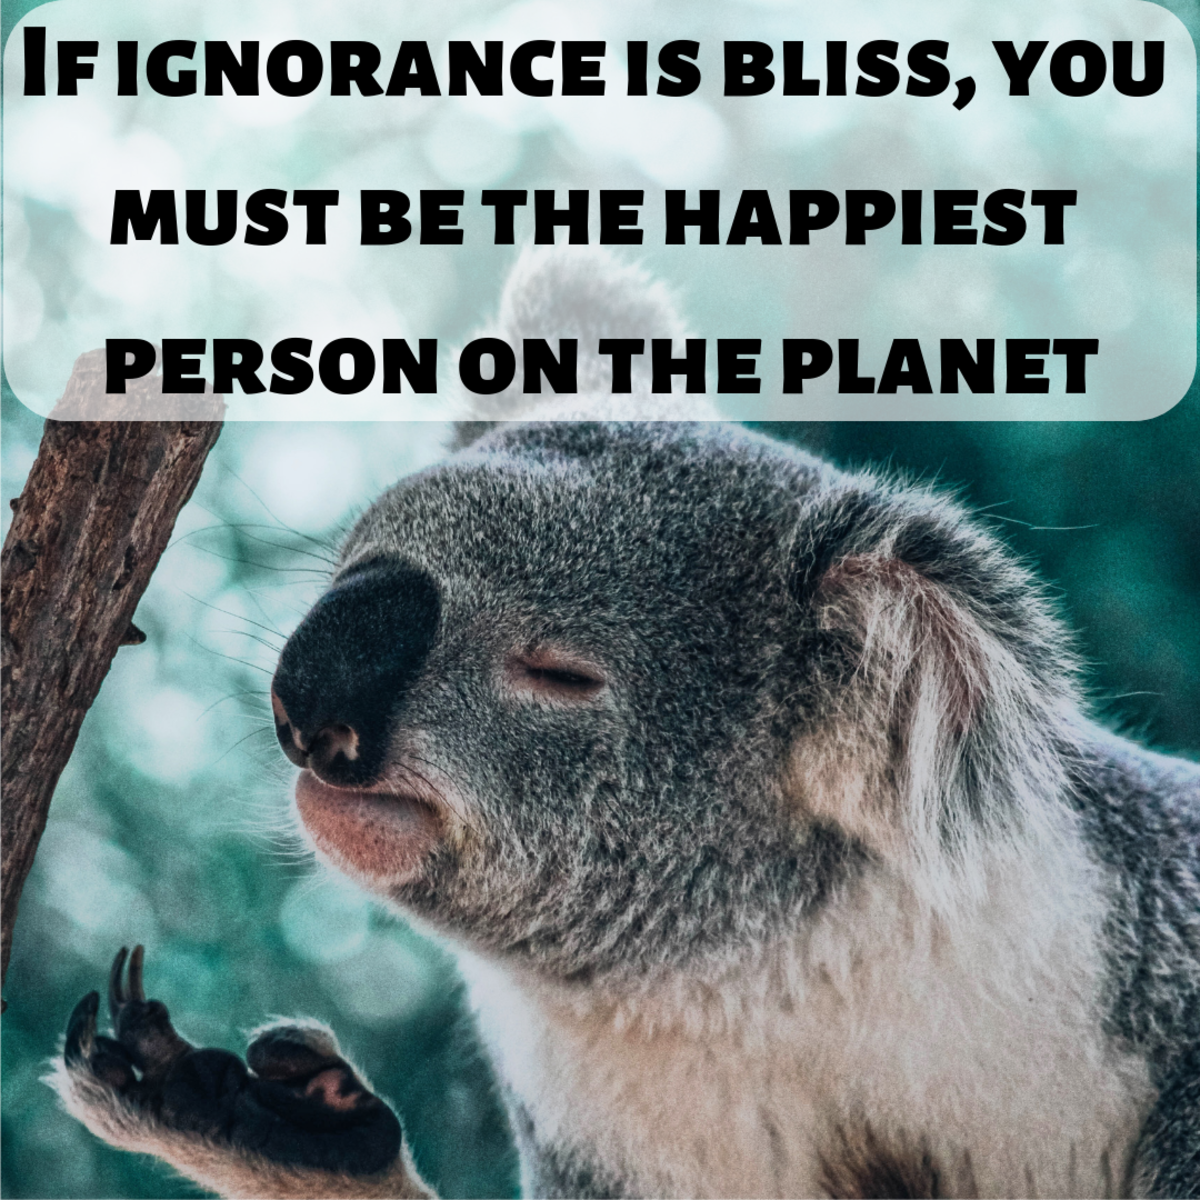 If ignorance is bliss, you must be the happiest person on the planet.